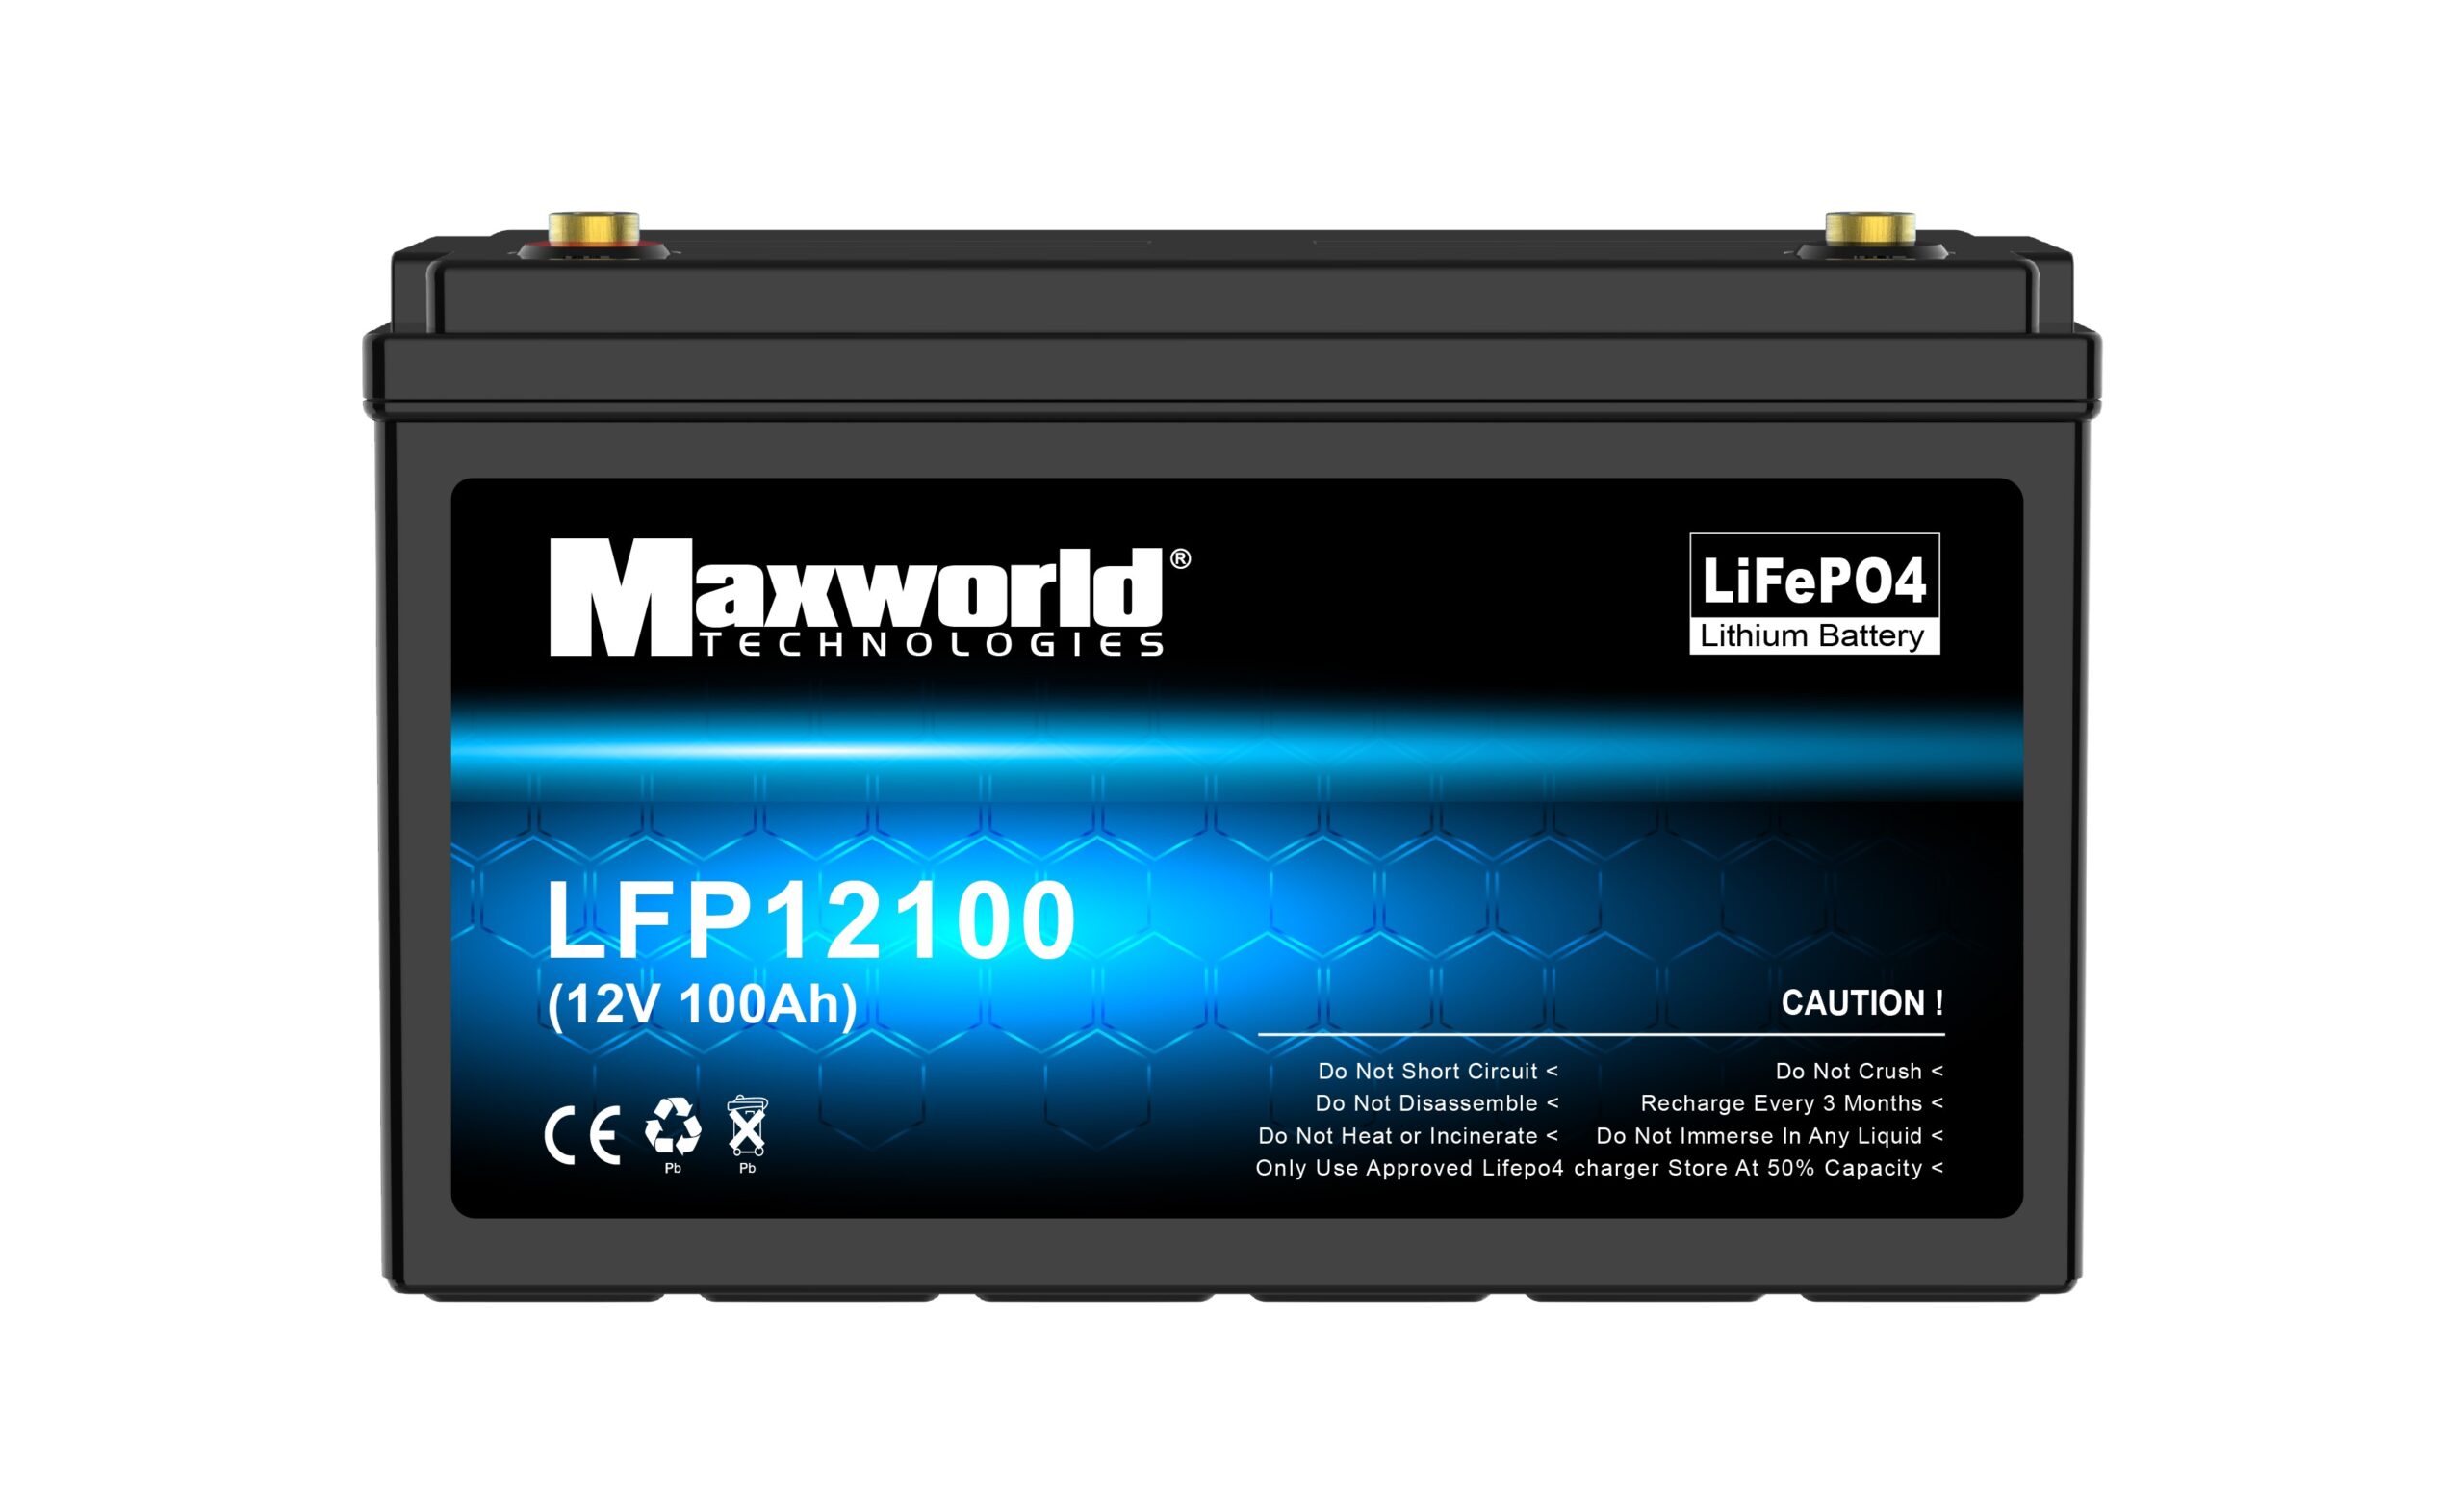 Lifepo4 _ a Battery of Excellence and Execution